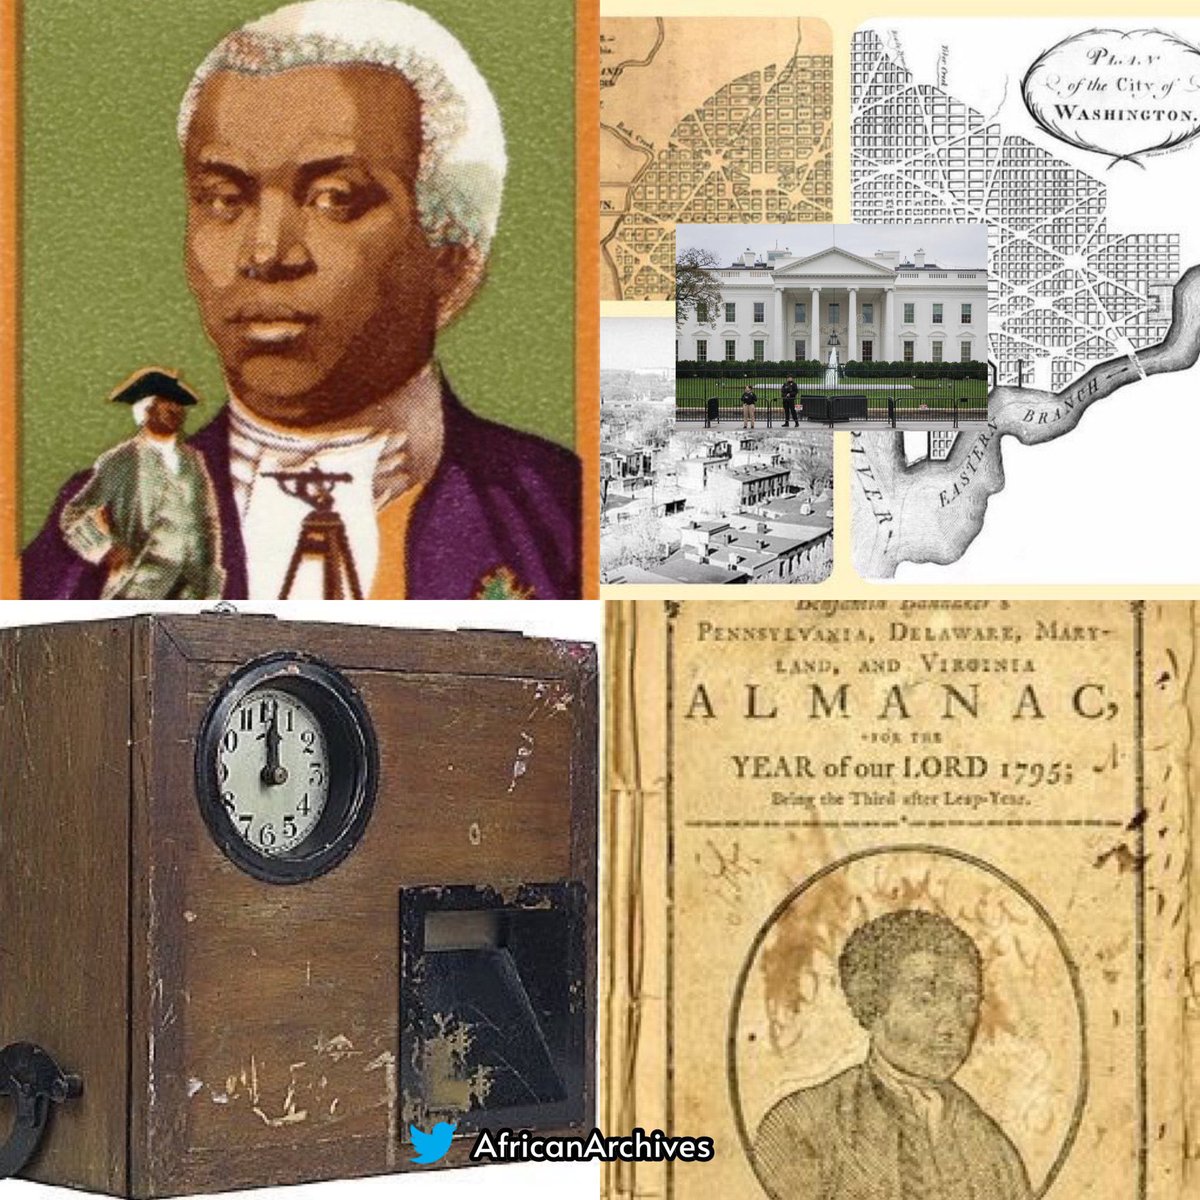 On this day in 1806, Benjamin Banneker died. In 1753, he created the first functioning clock in the U.S entirely out of wood, it was so advanced it kept accurate time for over 50 years. During his funeral, all his belongings including the clock were destroyed in a mysterious